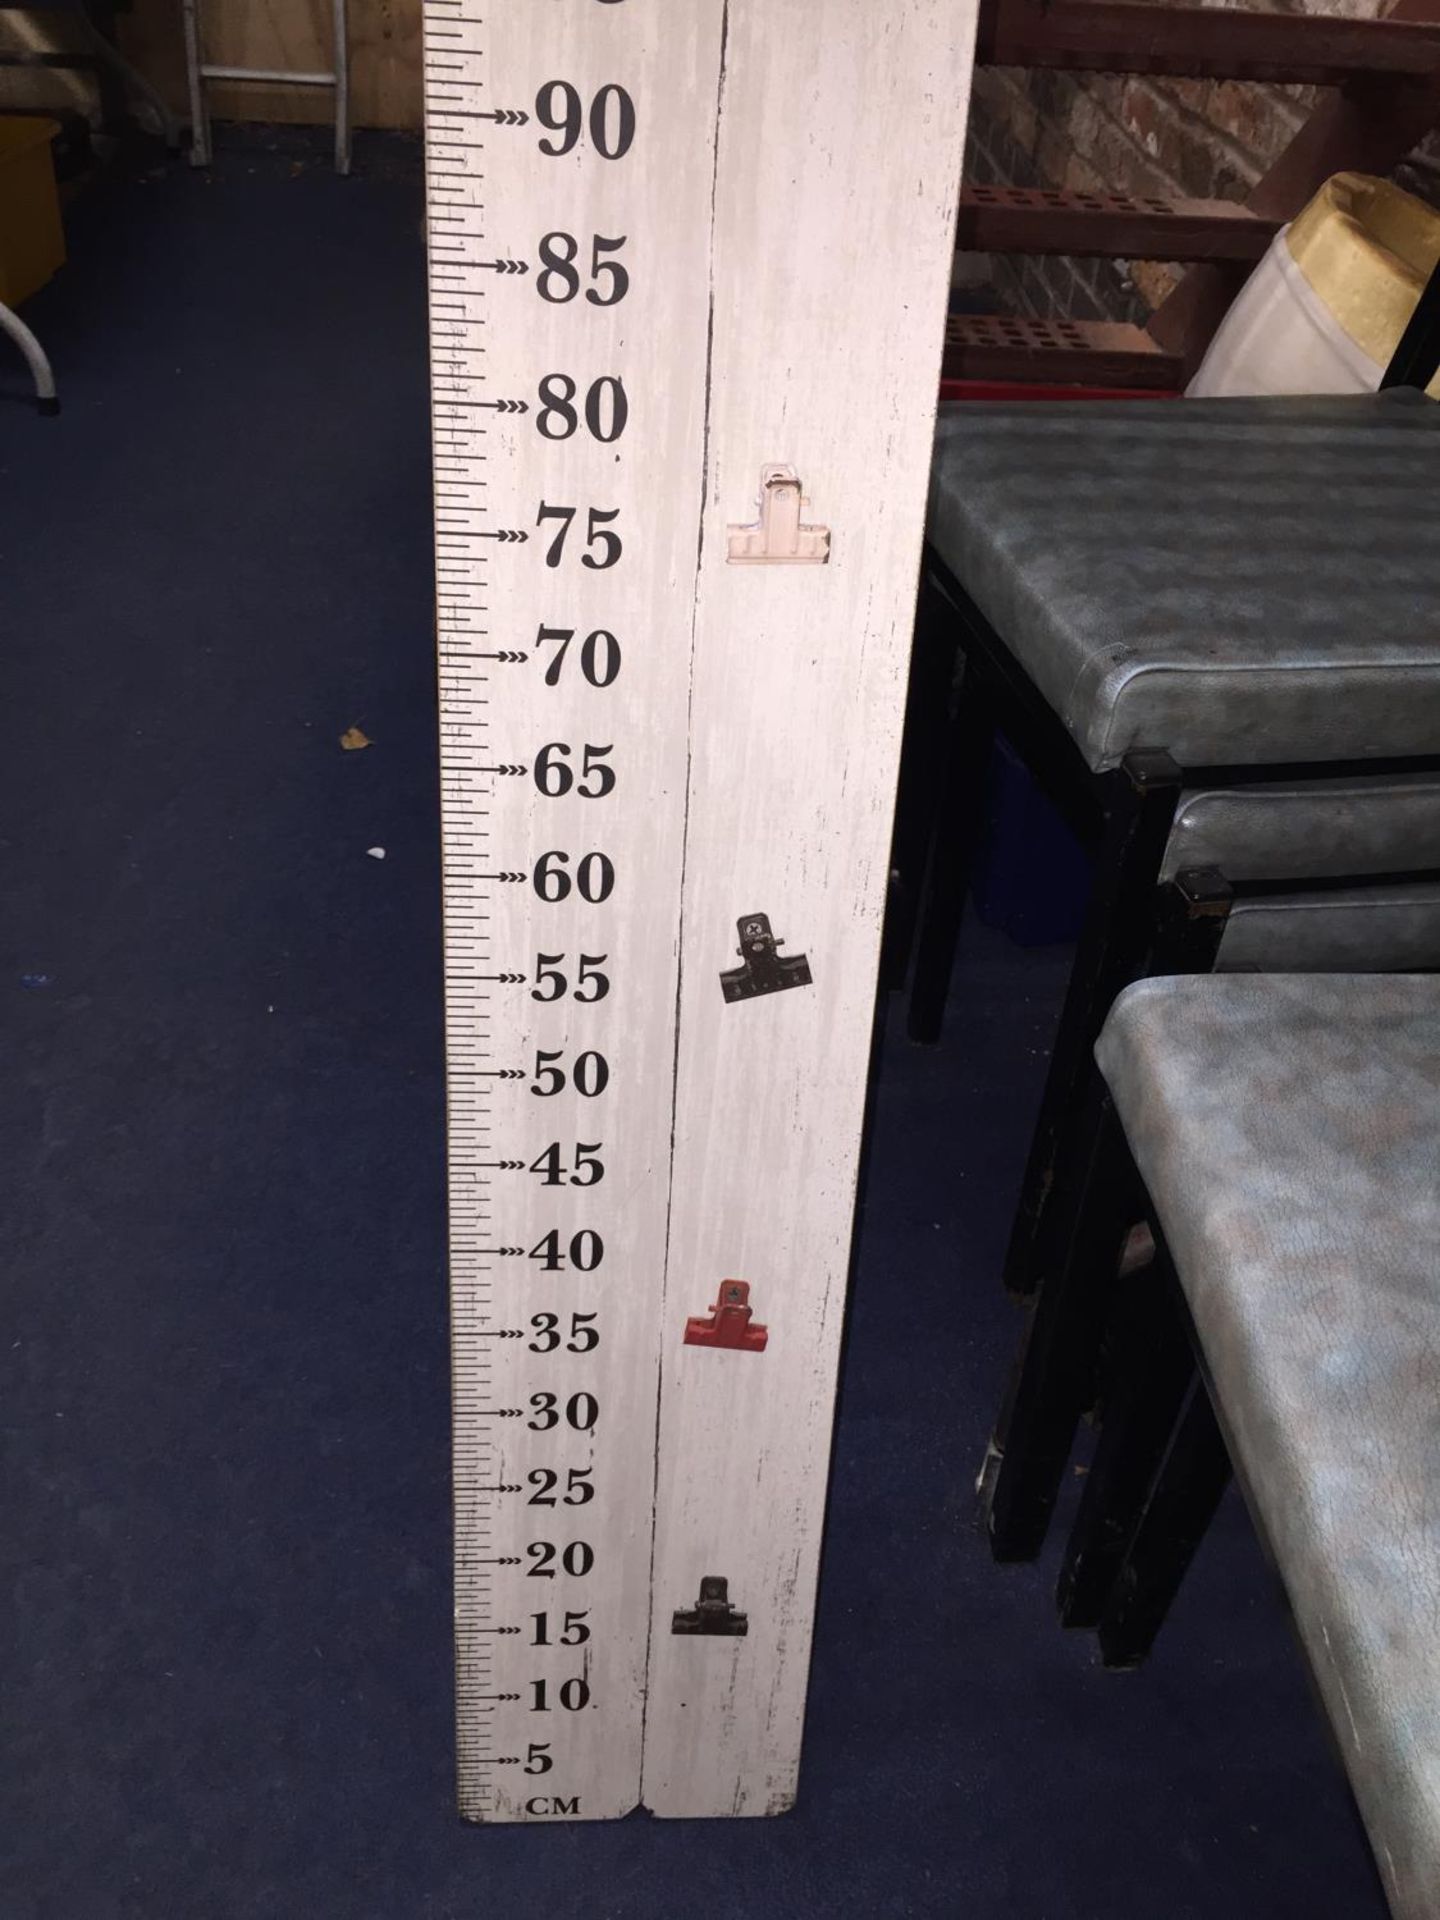 A FAIRGROUND MEASURING STICK MEASURING CHILDREN'S HEIGHT - Image 3 of 3